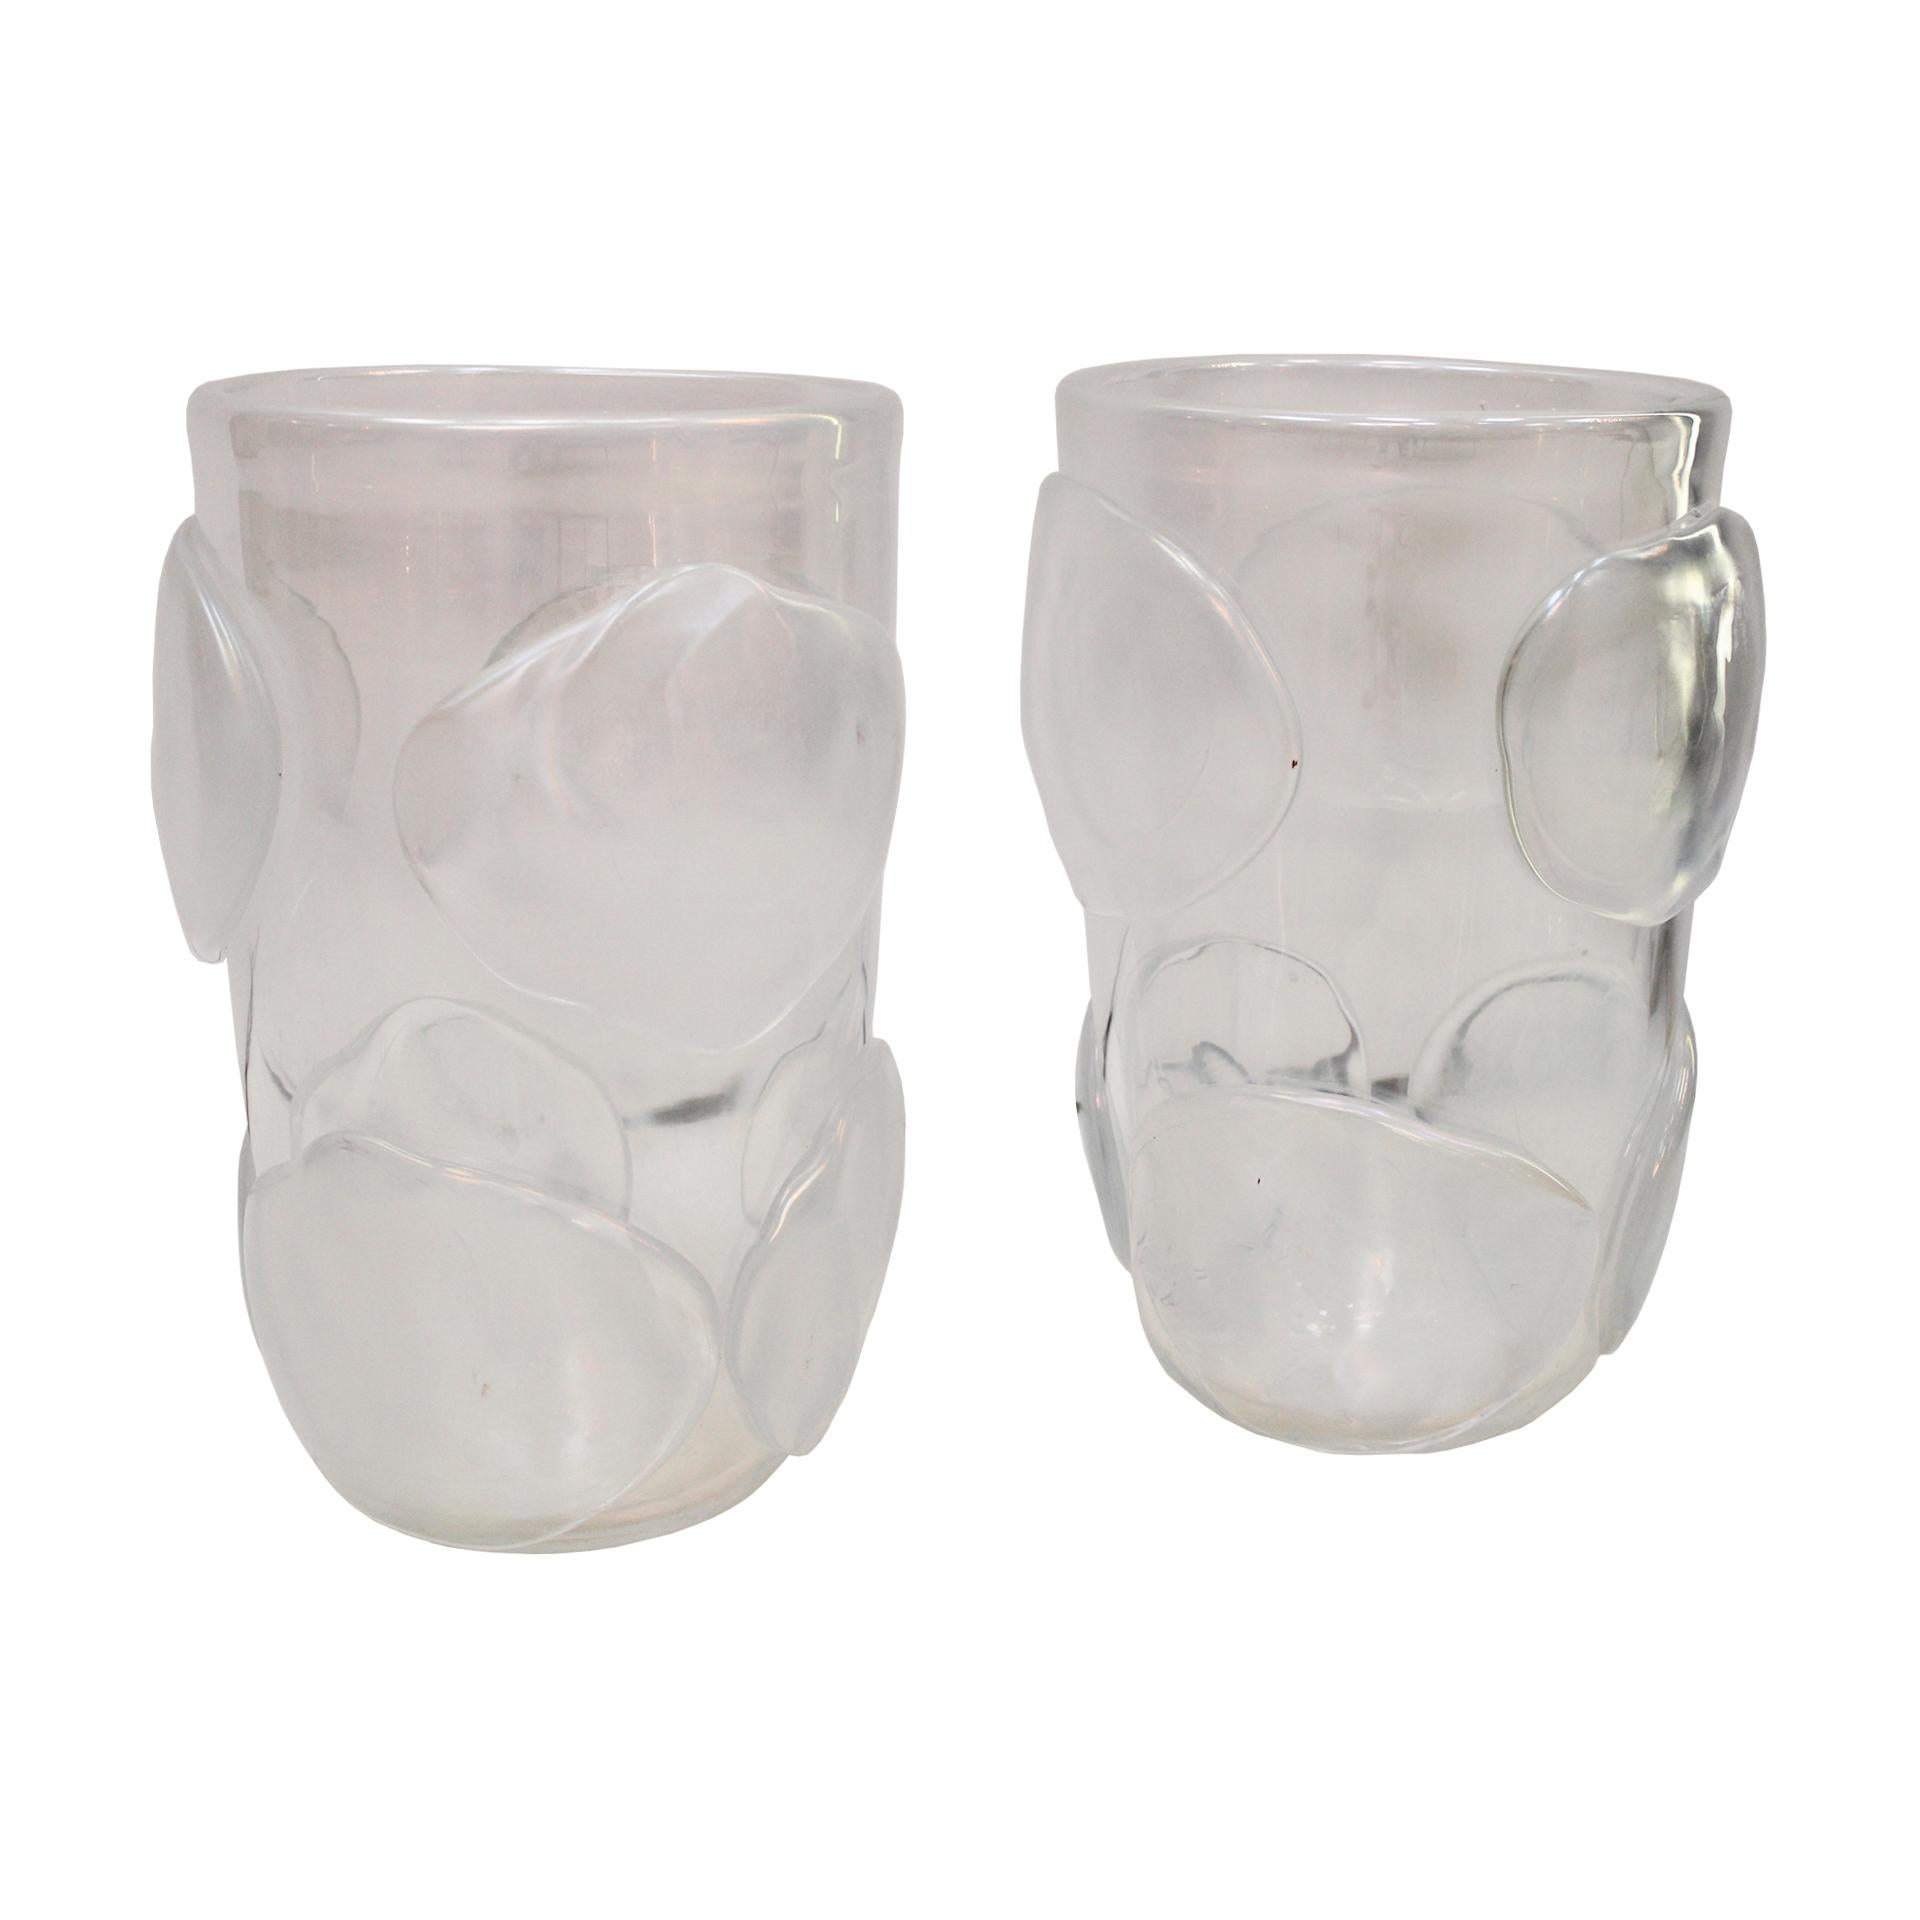 Pair of Murano hand blown vases made of opaline glass by the Italian artist glassblower Costantini. The body is decorated with round freeform reliefs.

These exquisite Venetian vases are signed underneath, Italy, 1980s.

Every item LA Studio offers